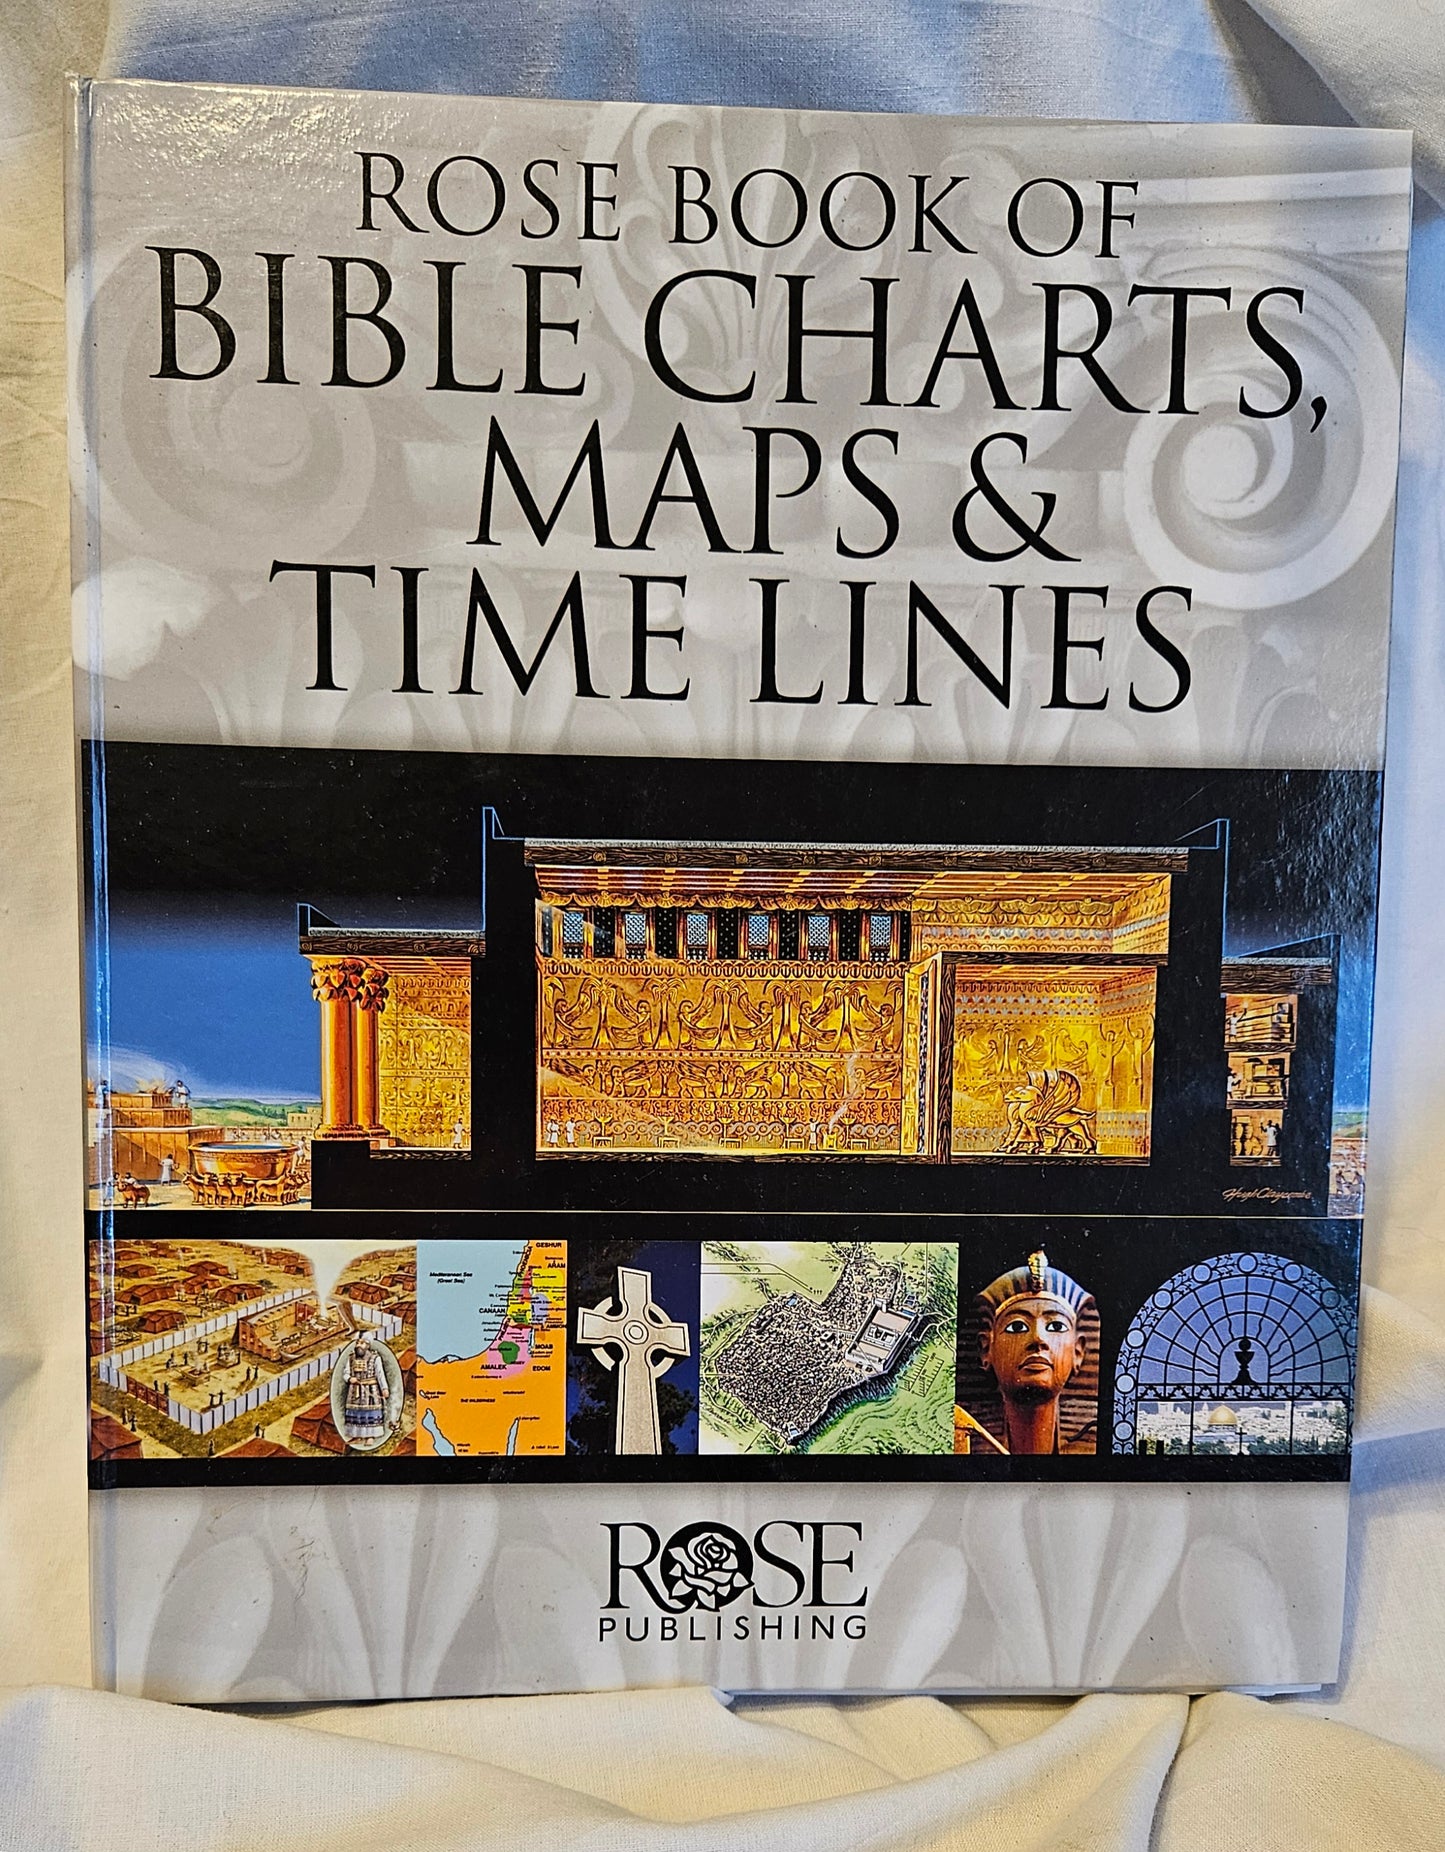 Rose Book of Bible Charts, Maps, & Timelines - 2005